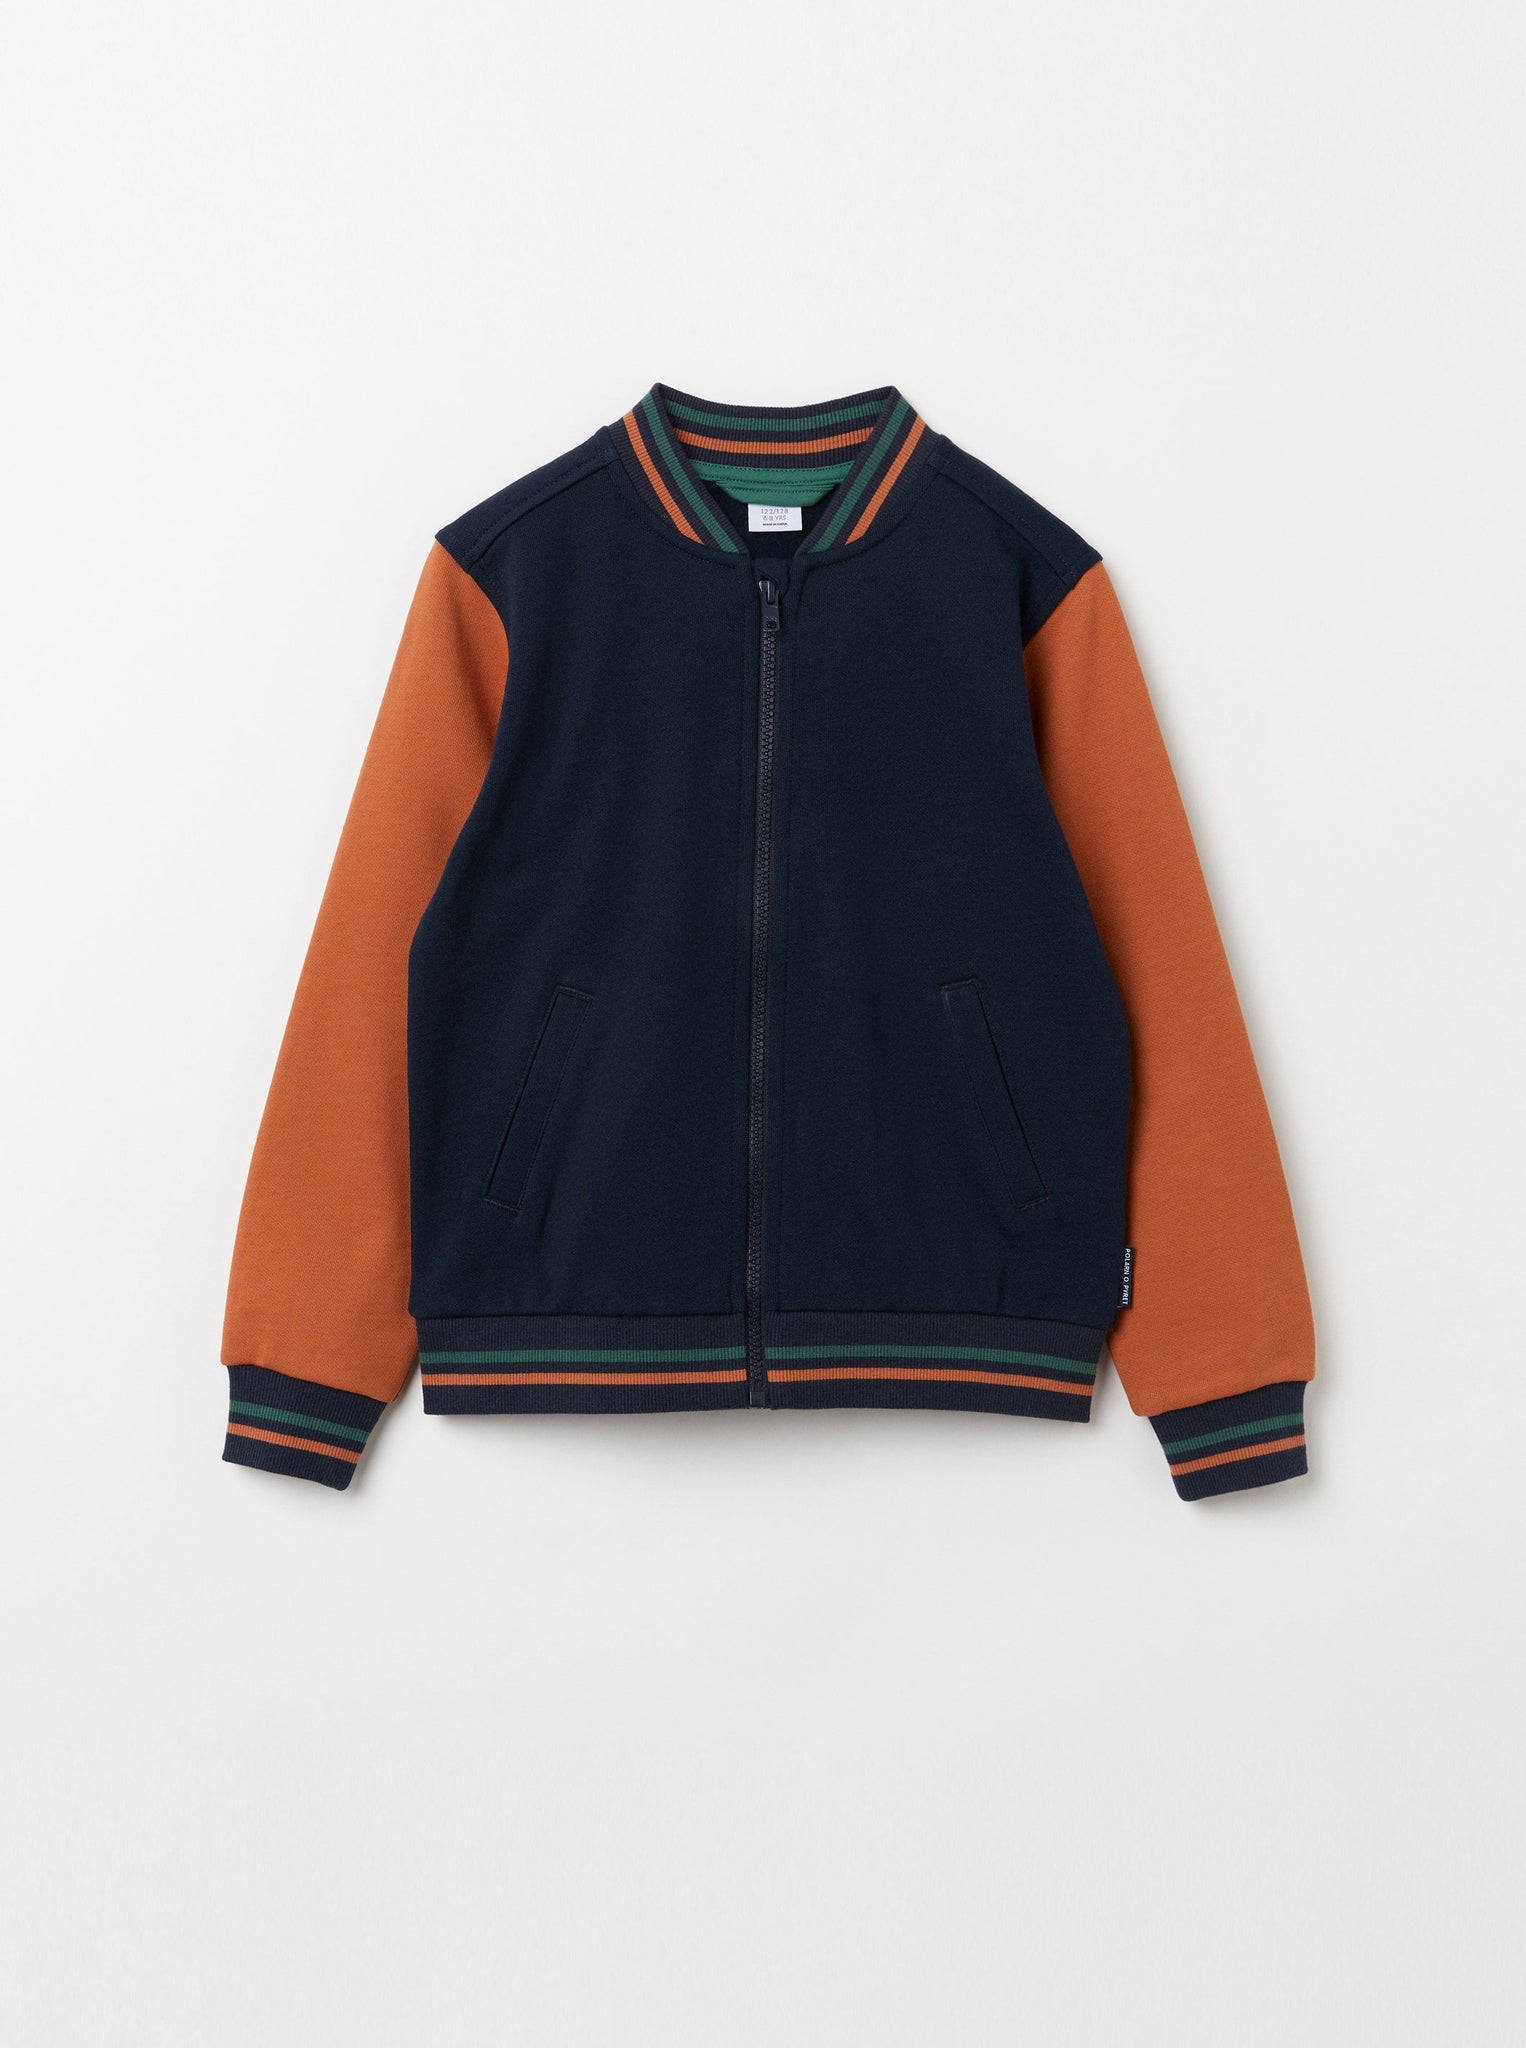 Organic Cotton Navy Baseball Jacket from the Polarn O. Pyret Kidswear collection. Nordic kids clothes made from sustainable sources.